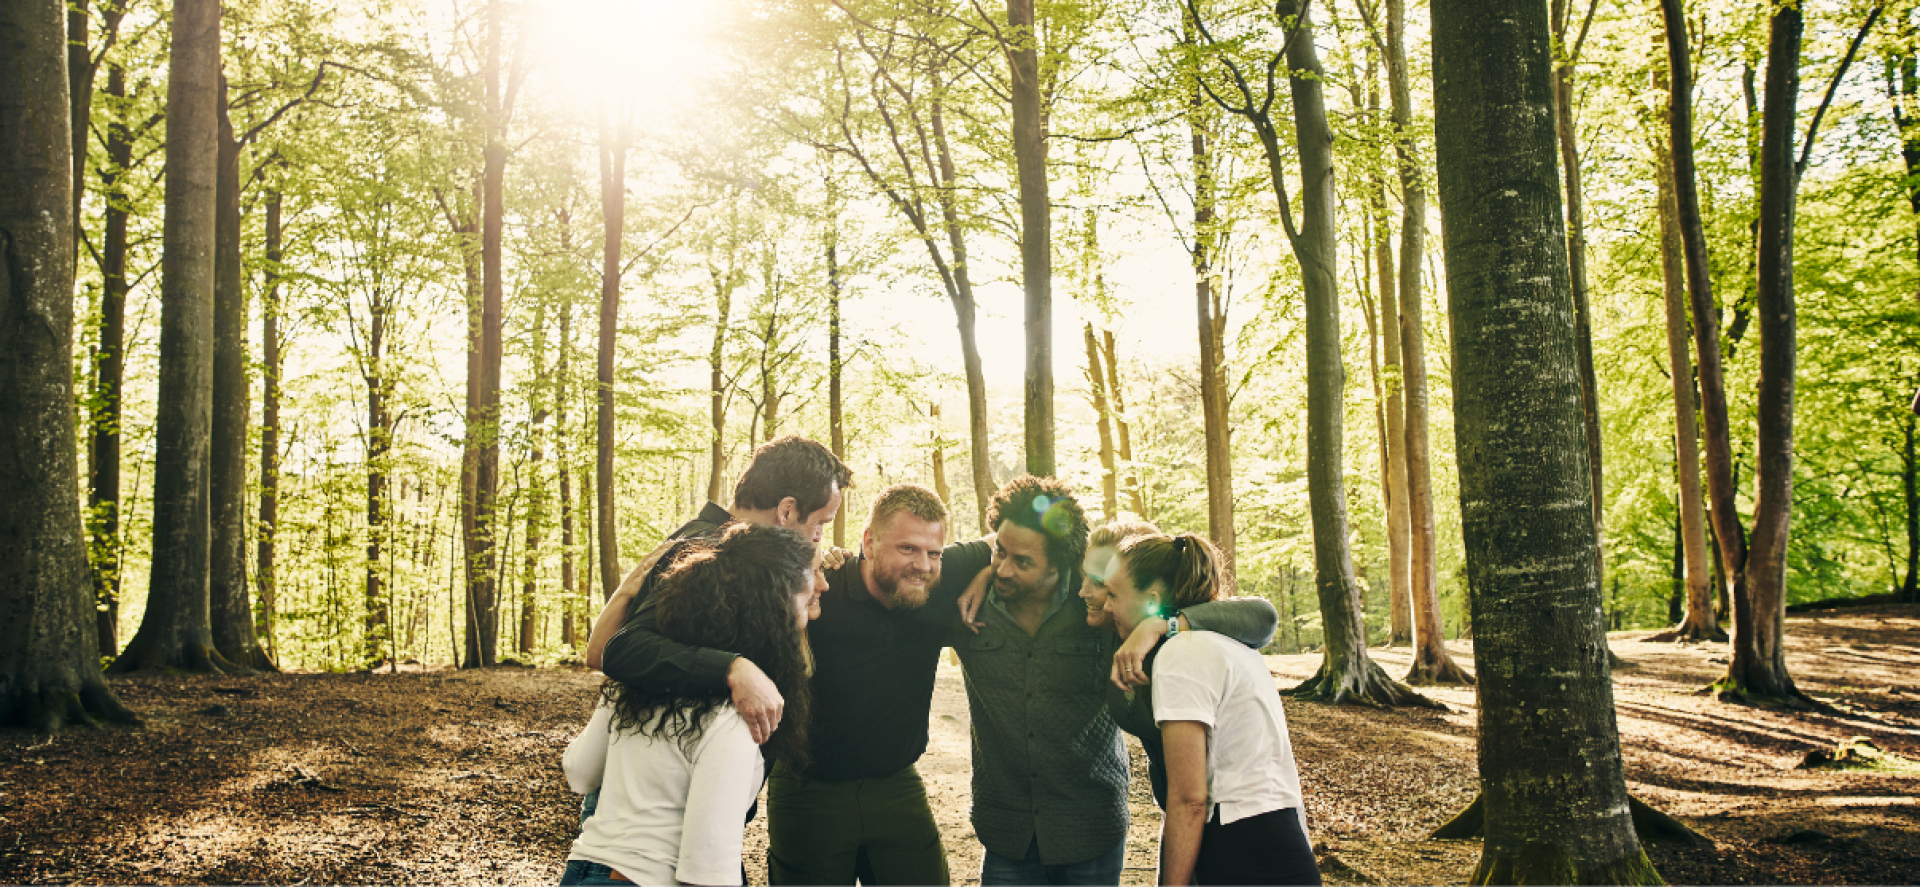 a group of people huddled together in nature, representing charity insight